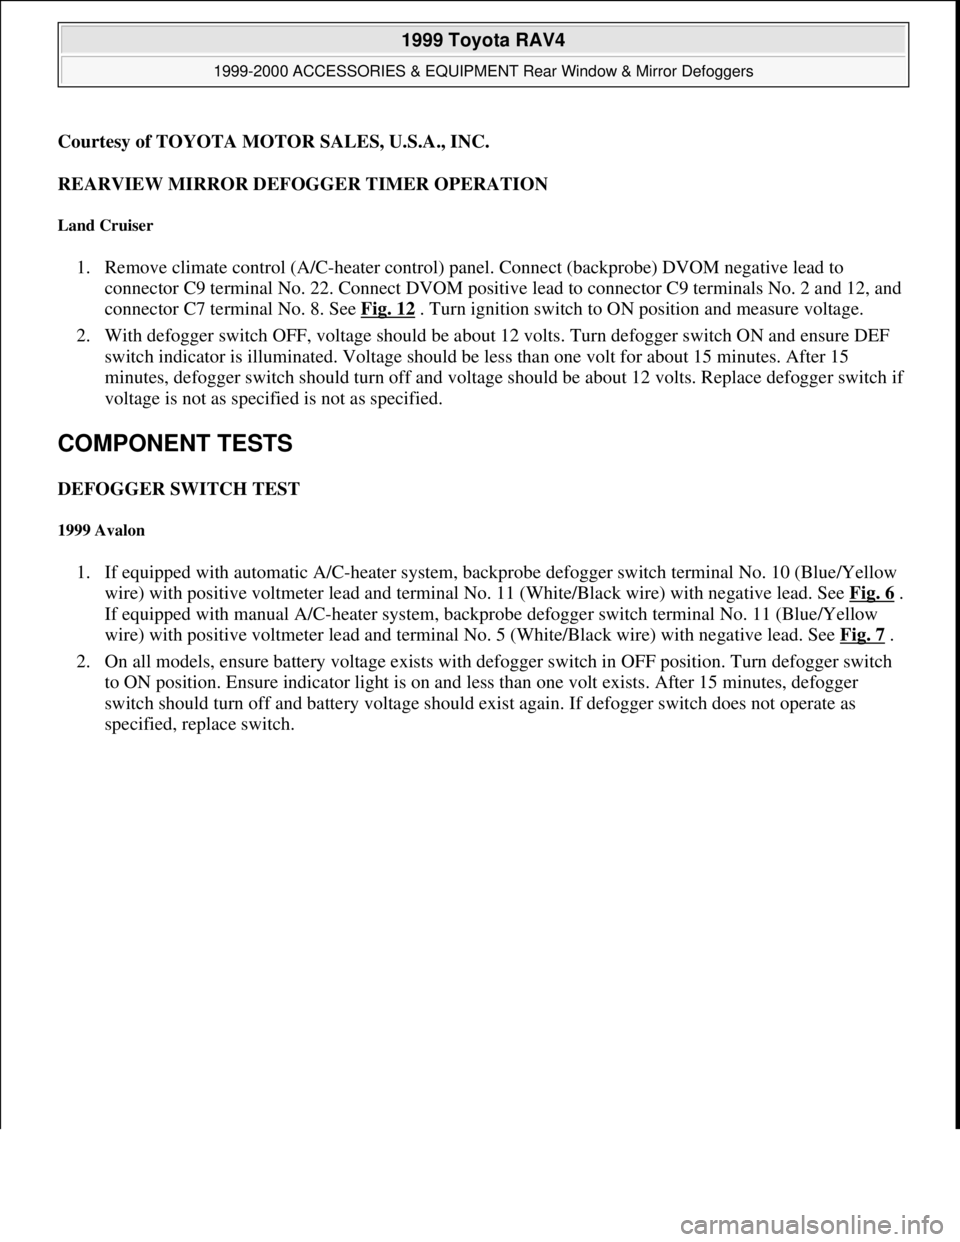 TOYOTA RAV4 1996  Service Repair Manual Courtesy of TOYOTA MOTOR SALES, U.S.A., INC.
REARVIEW MIRROR DEFOGGER TIMER OPERATION 
Land Cruiser 
1. Remove climate control (A/C-heater control) panel. Connect (backprobe) DVOM negative lead to 
co